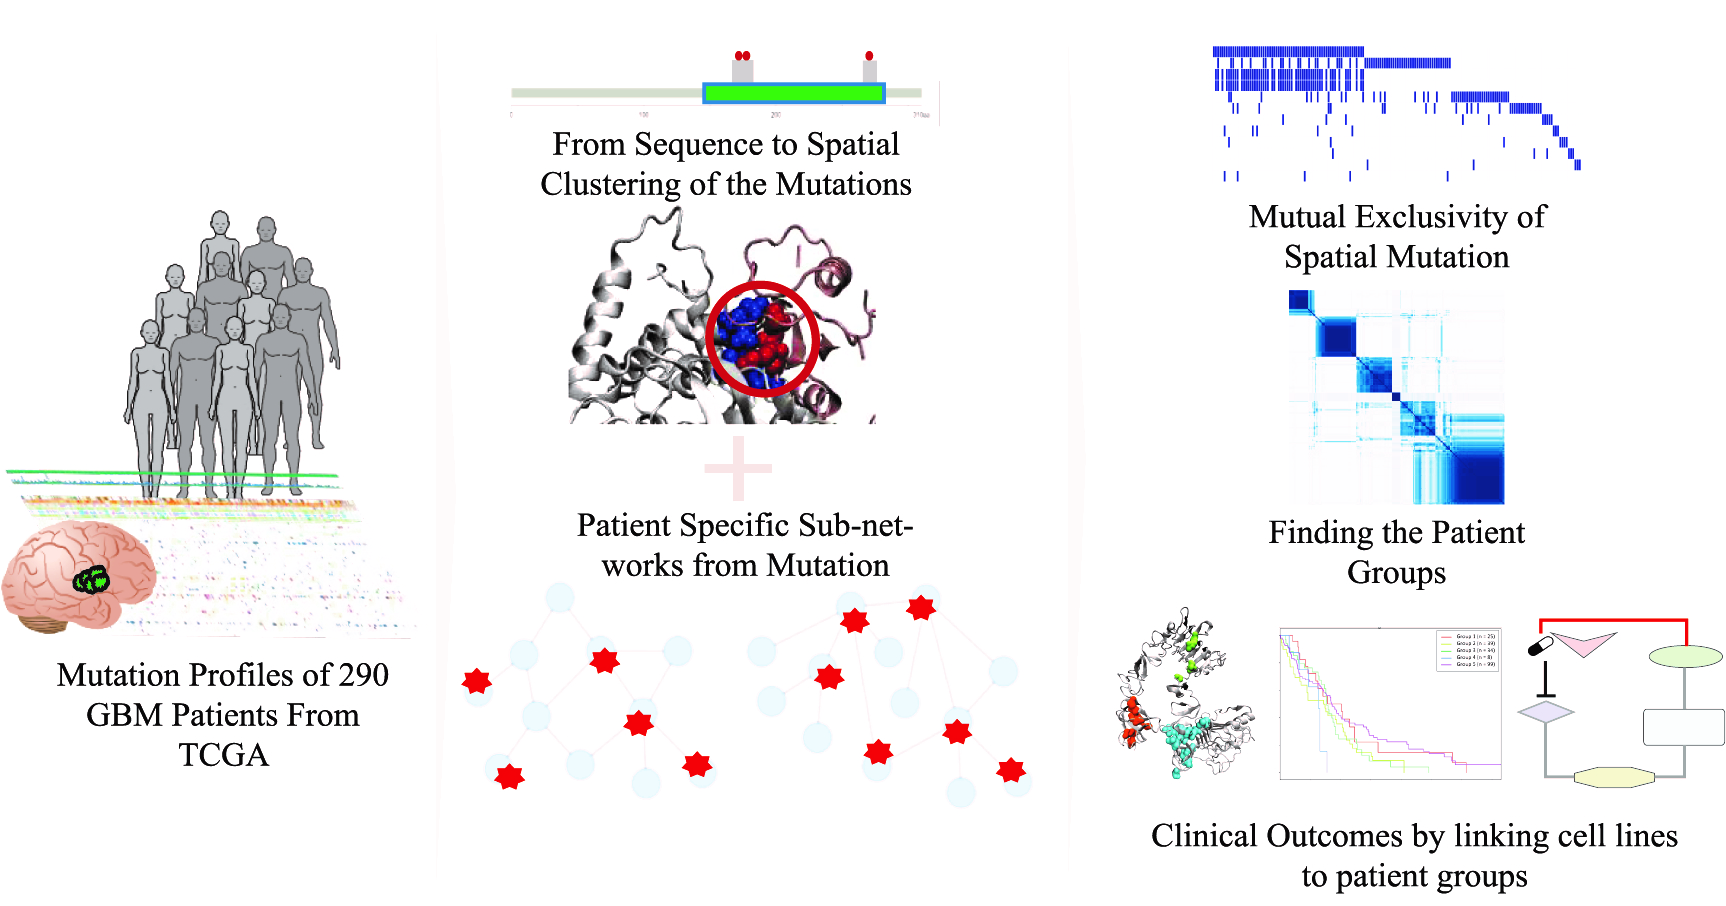 Cansu Dinçer, 3D Spatial Organization and Network-Guided Comparison of Mutation Profiles in Glioblastoma